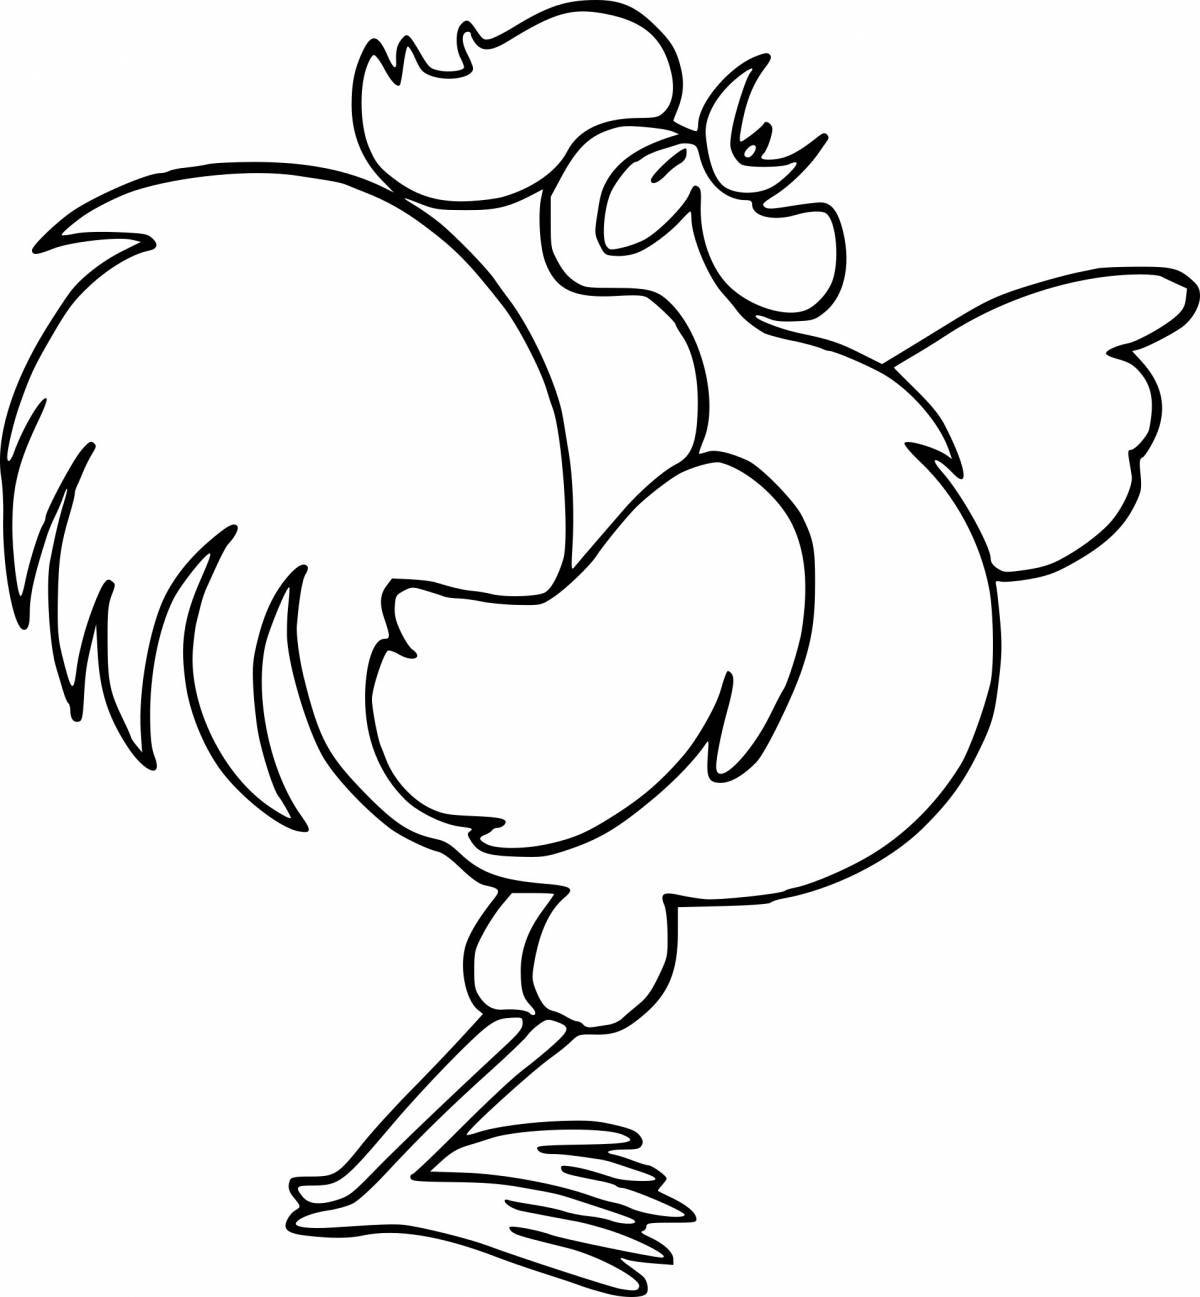 Rampant rooster coloring page